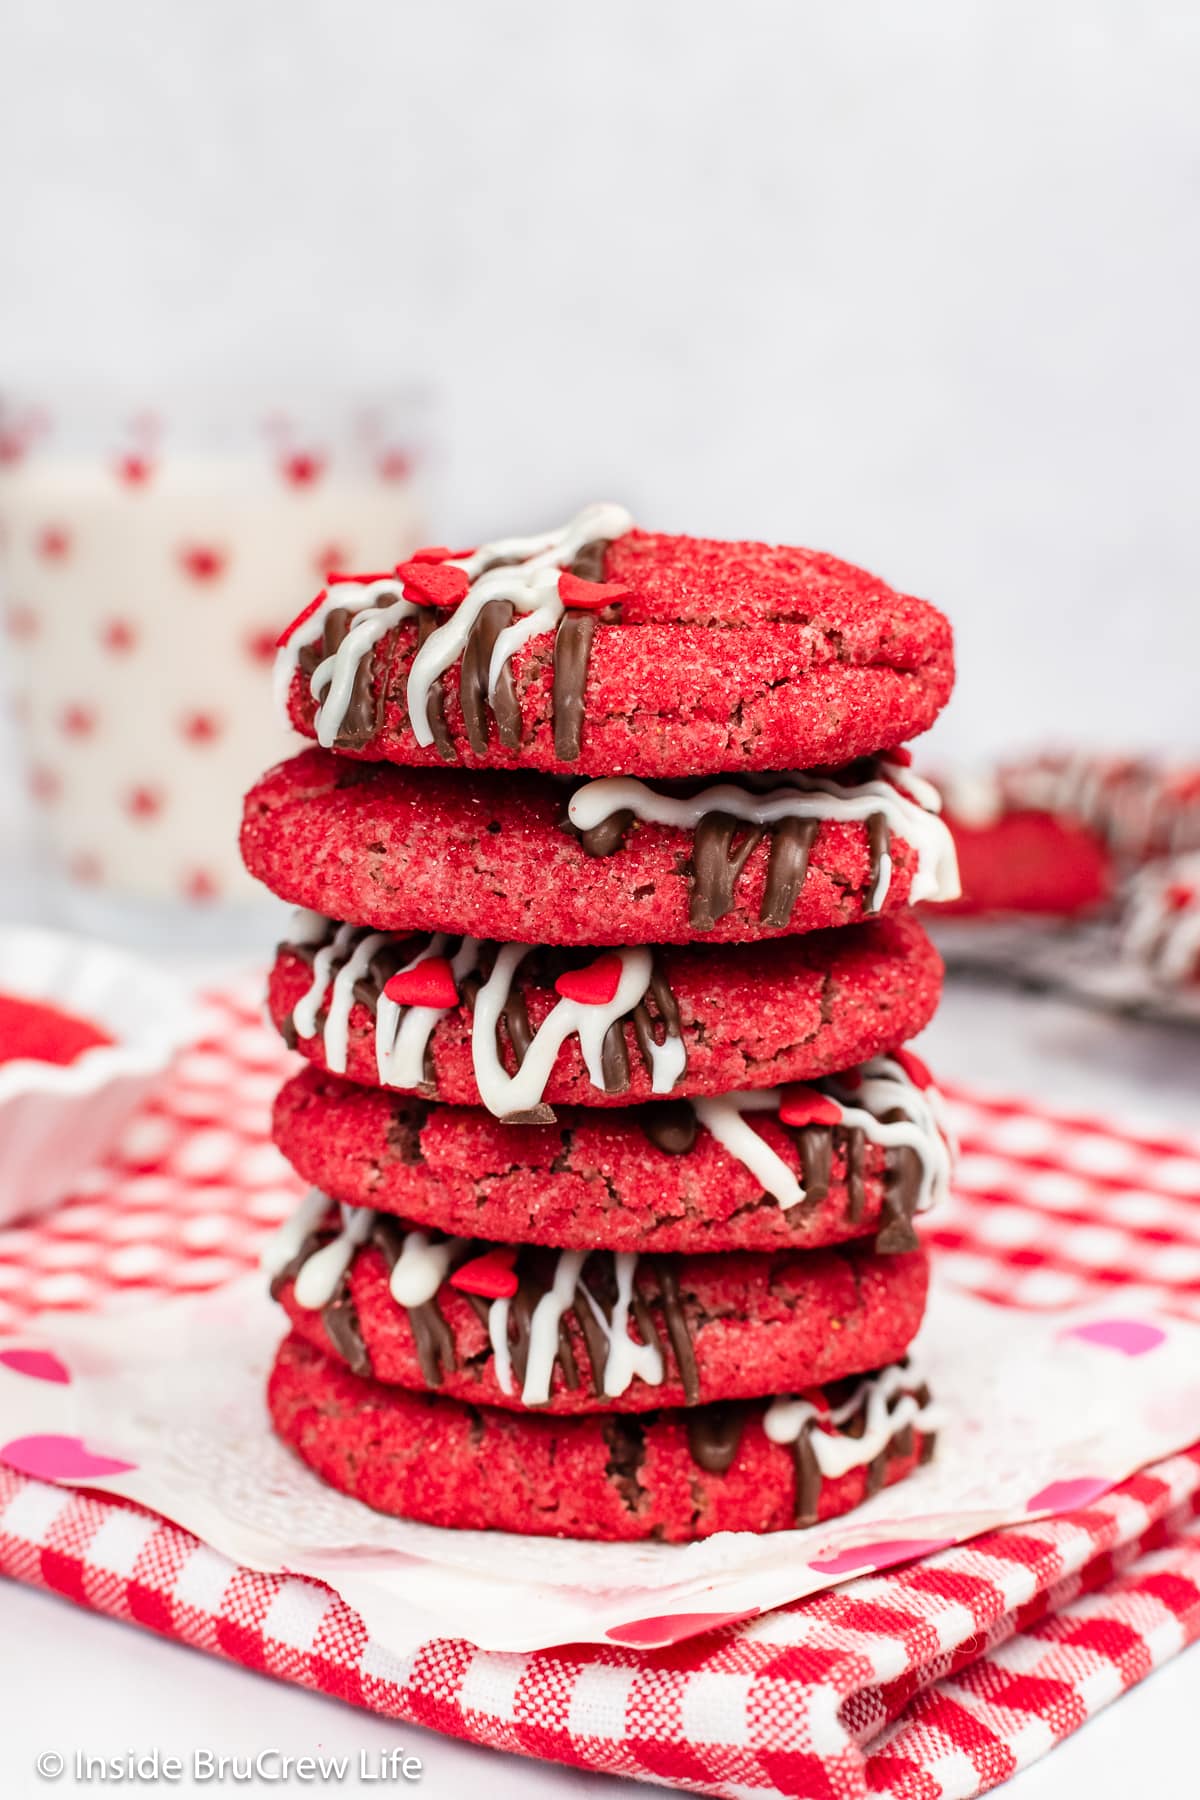 A stack of red cookies on a red and white checkered towel.